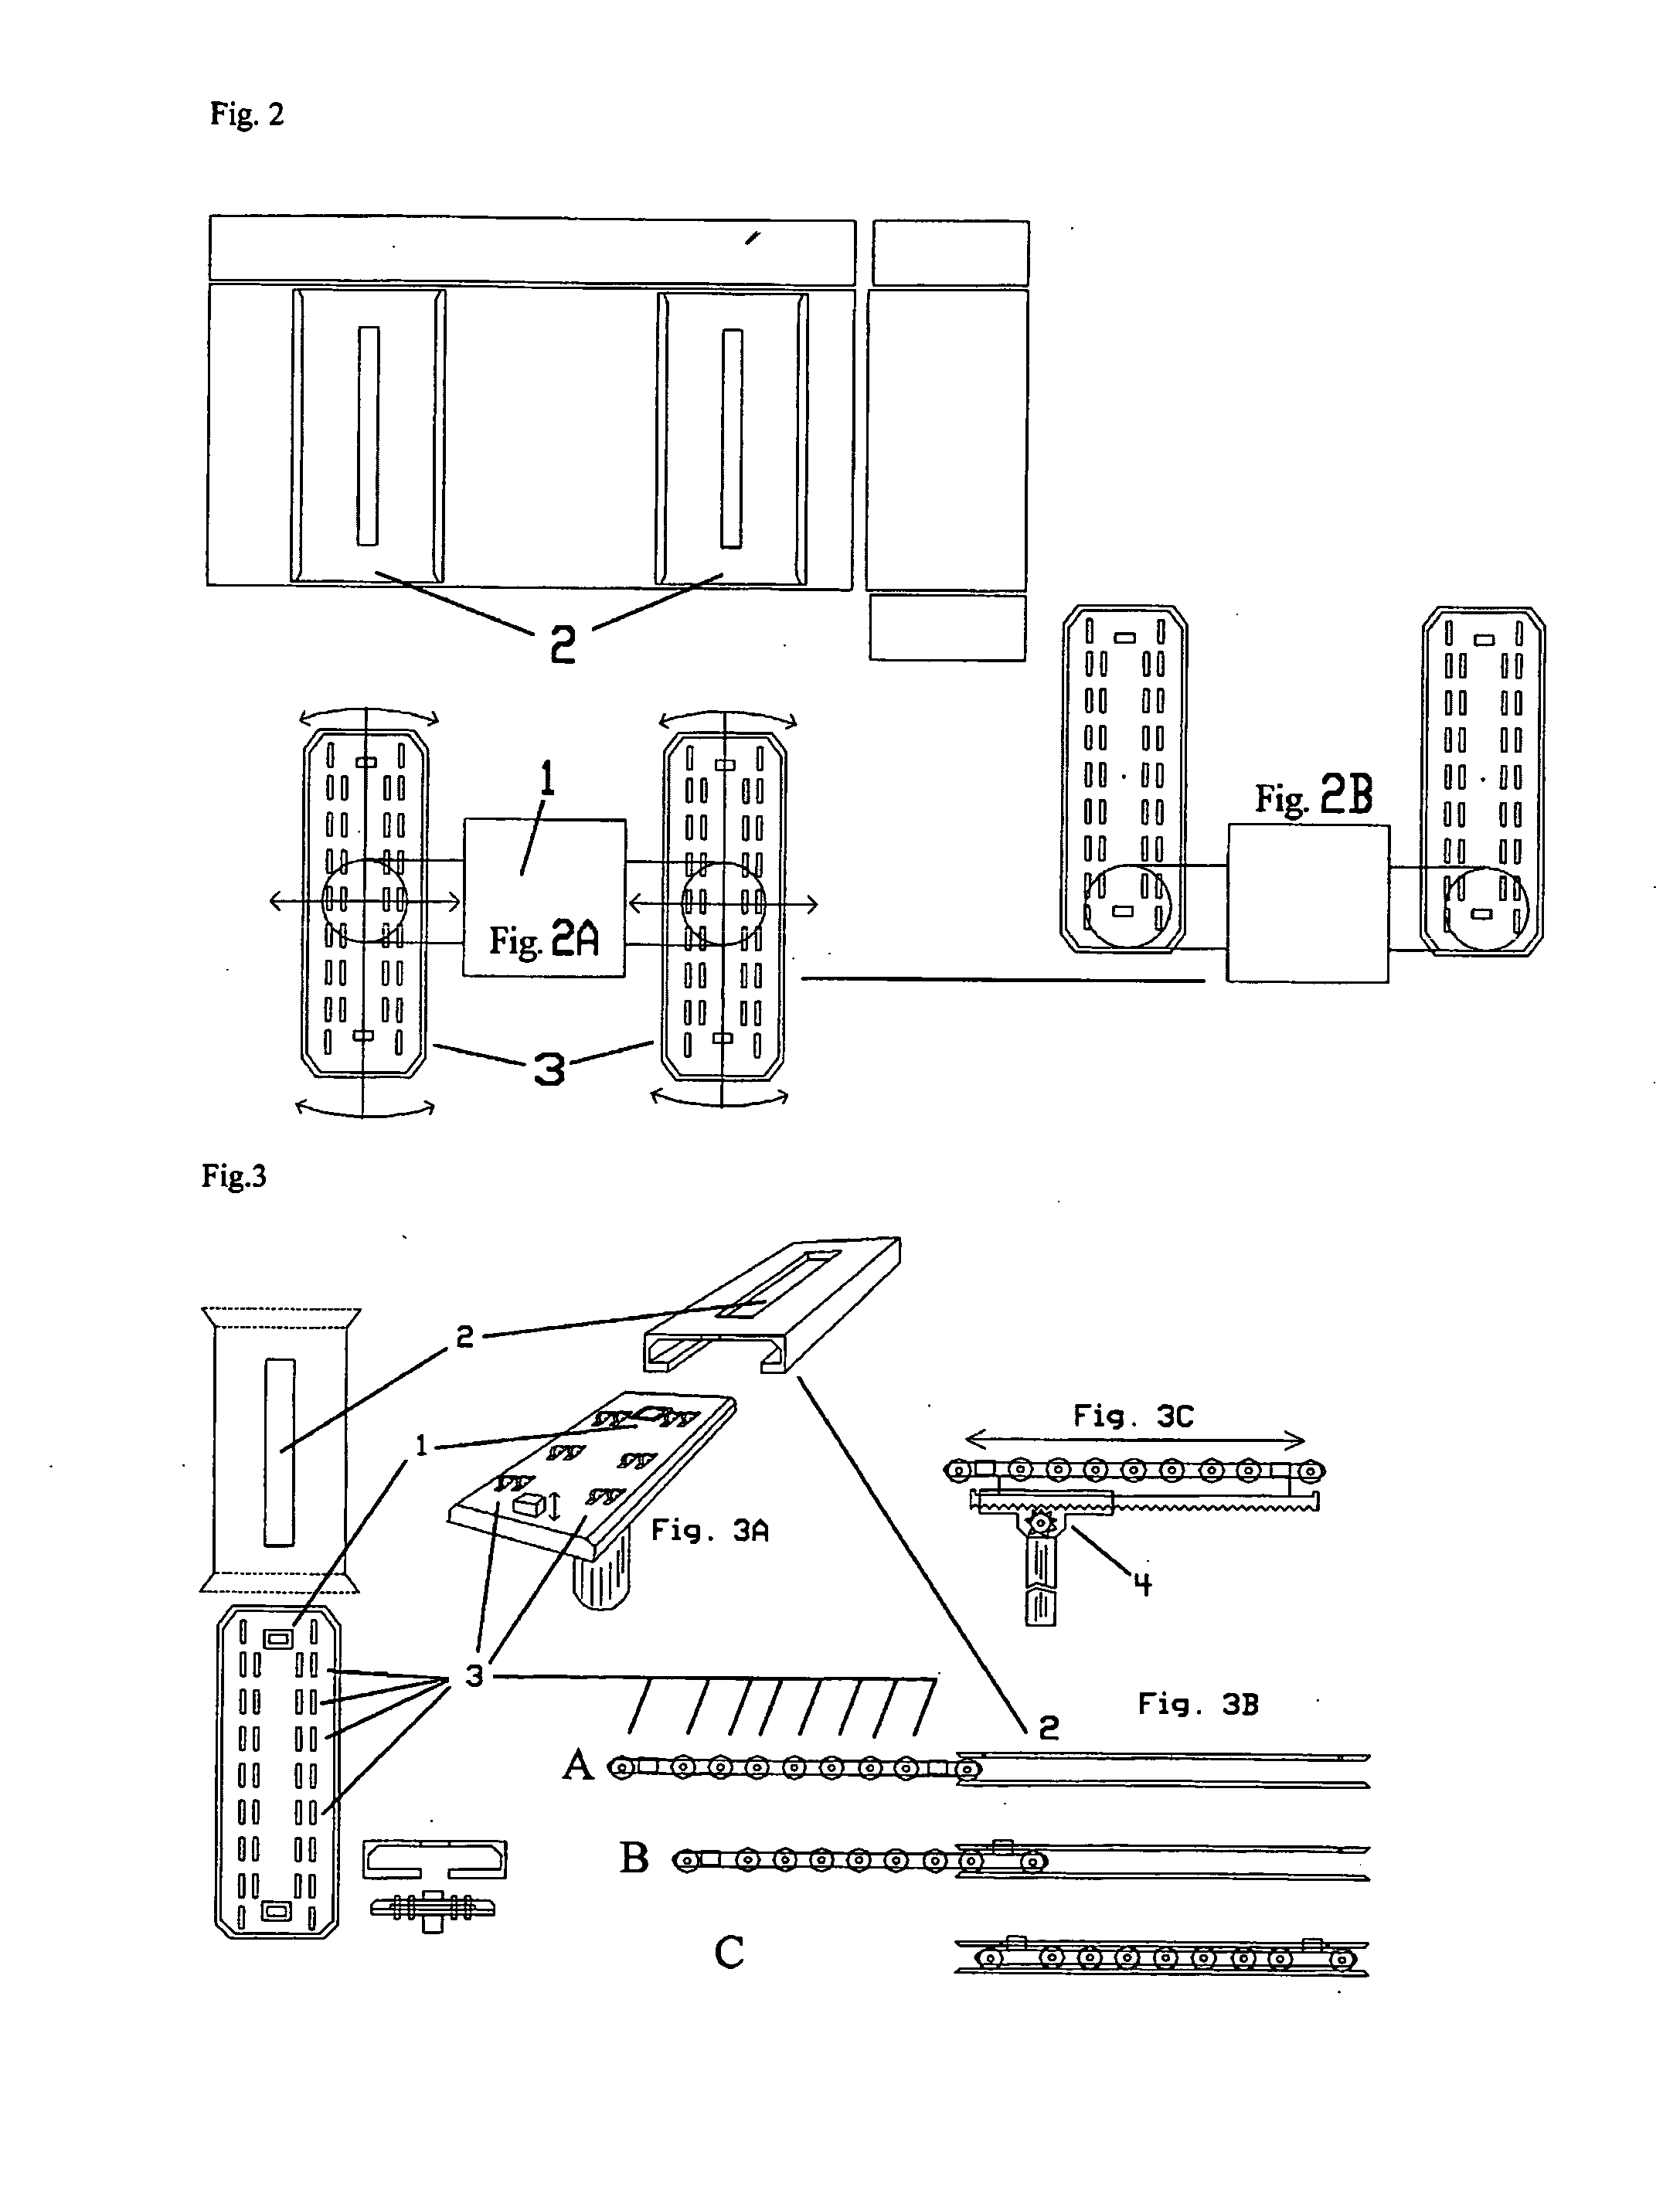 Medical lift and transport system, method and apparatus